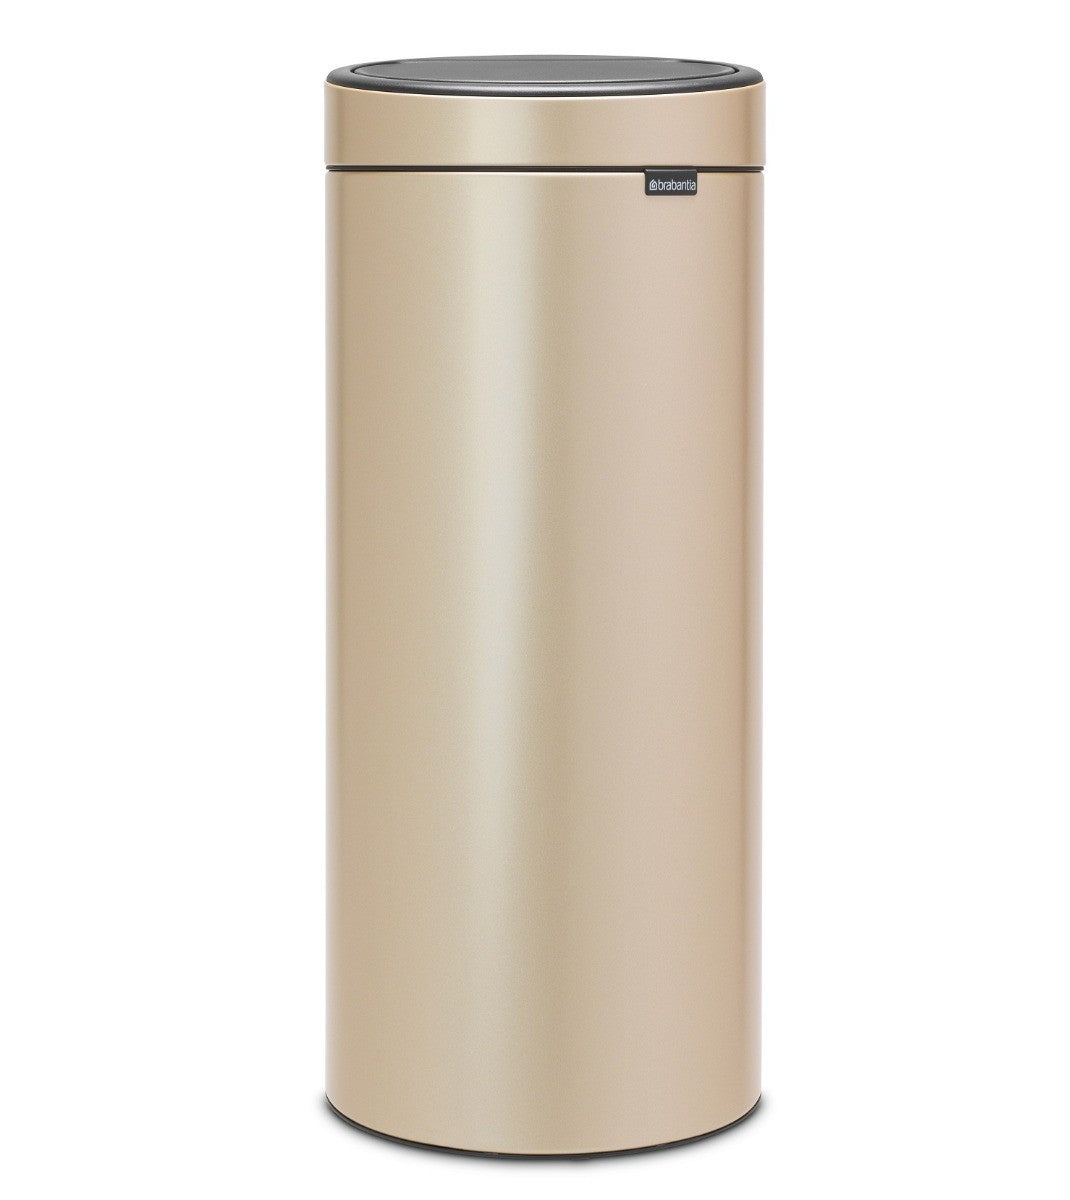 Brabantia Single Compartment 30 Litre Round Touch Opening Kitchen Bin in Metallic Gold: 304507